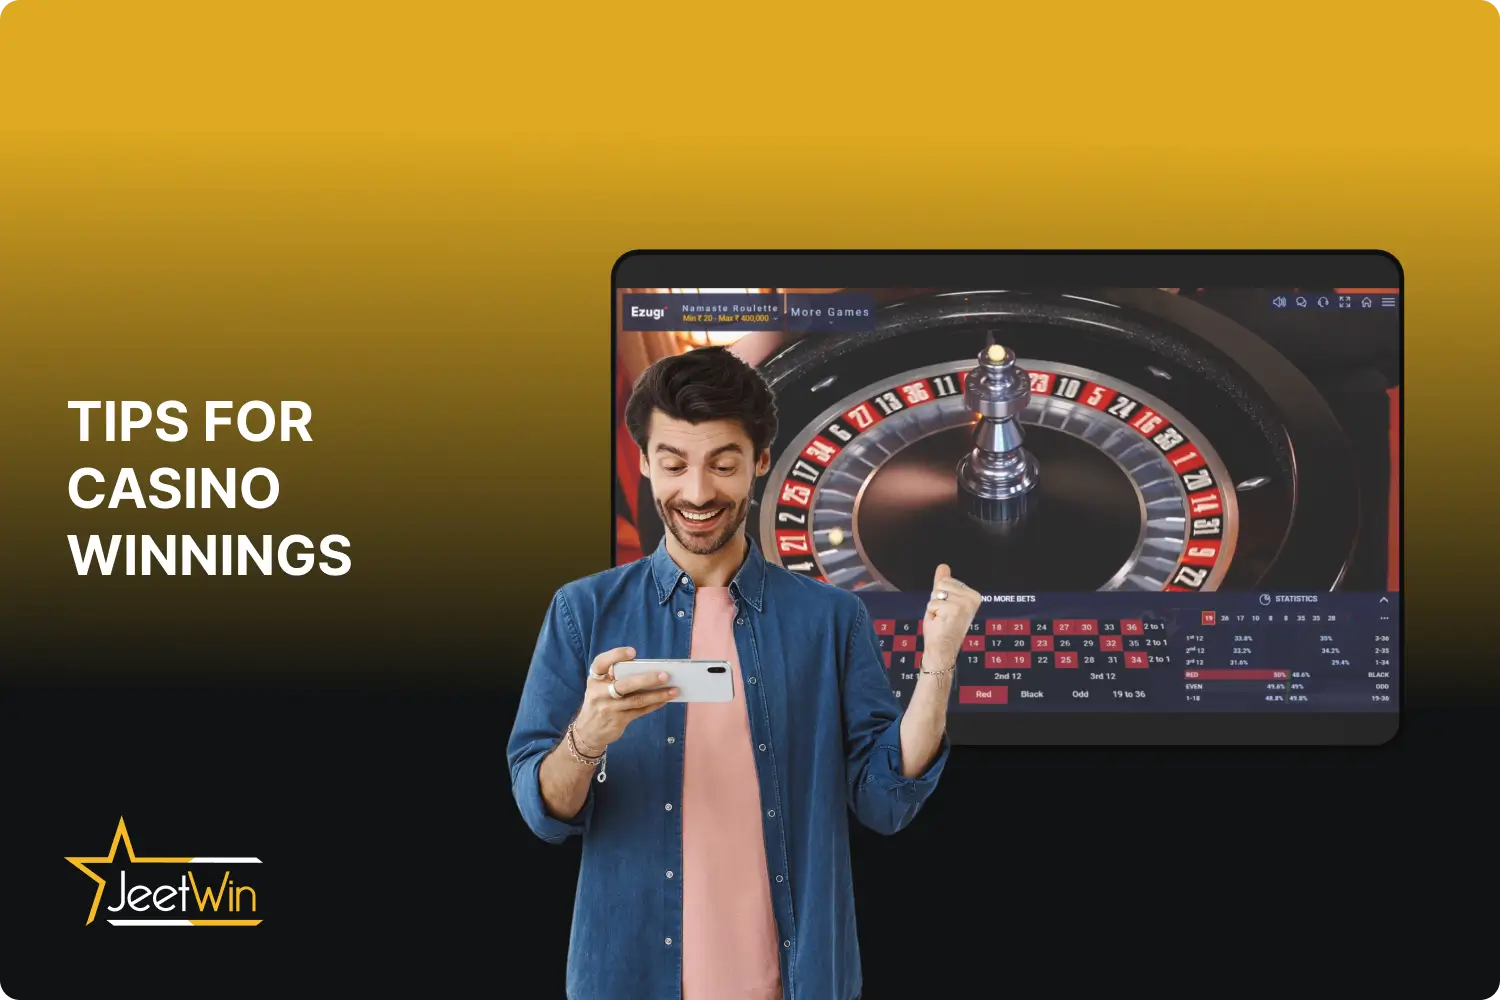 Jeetwin Casino offers some tips for winning that may be useful for players from India